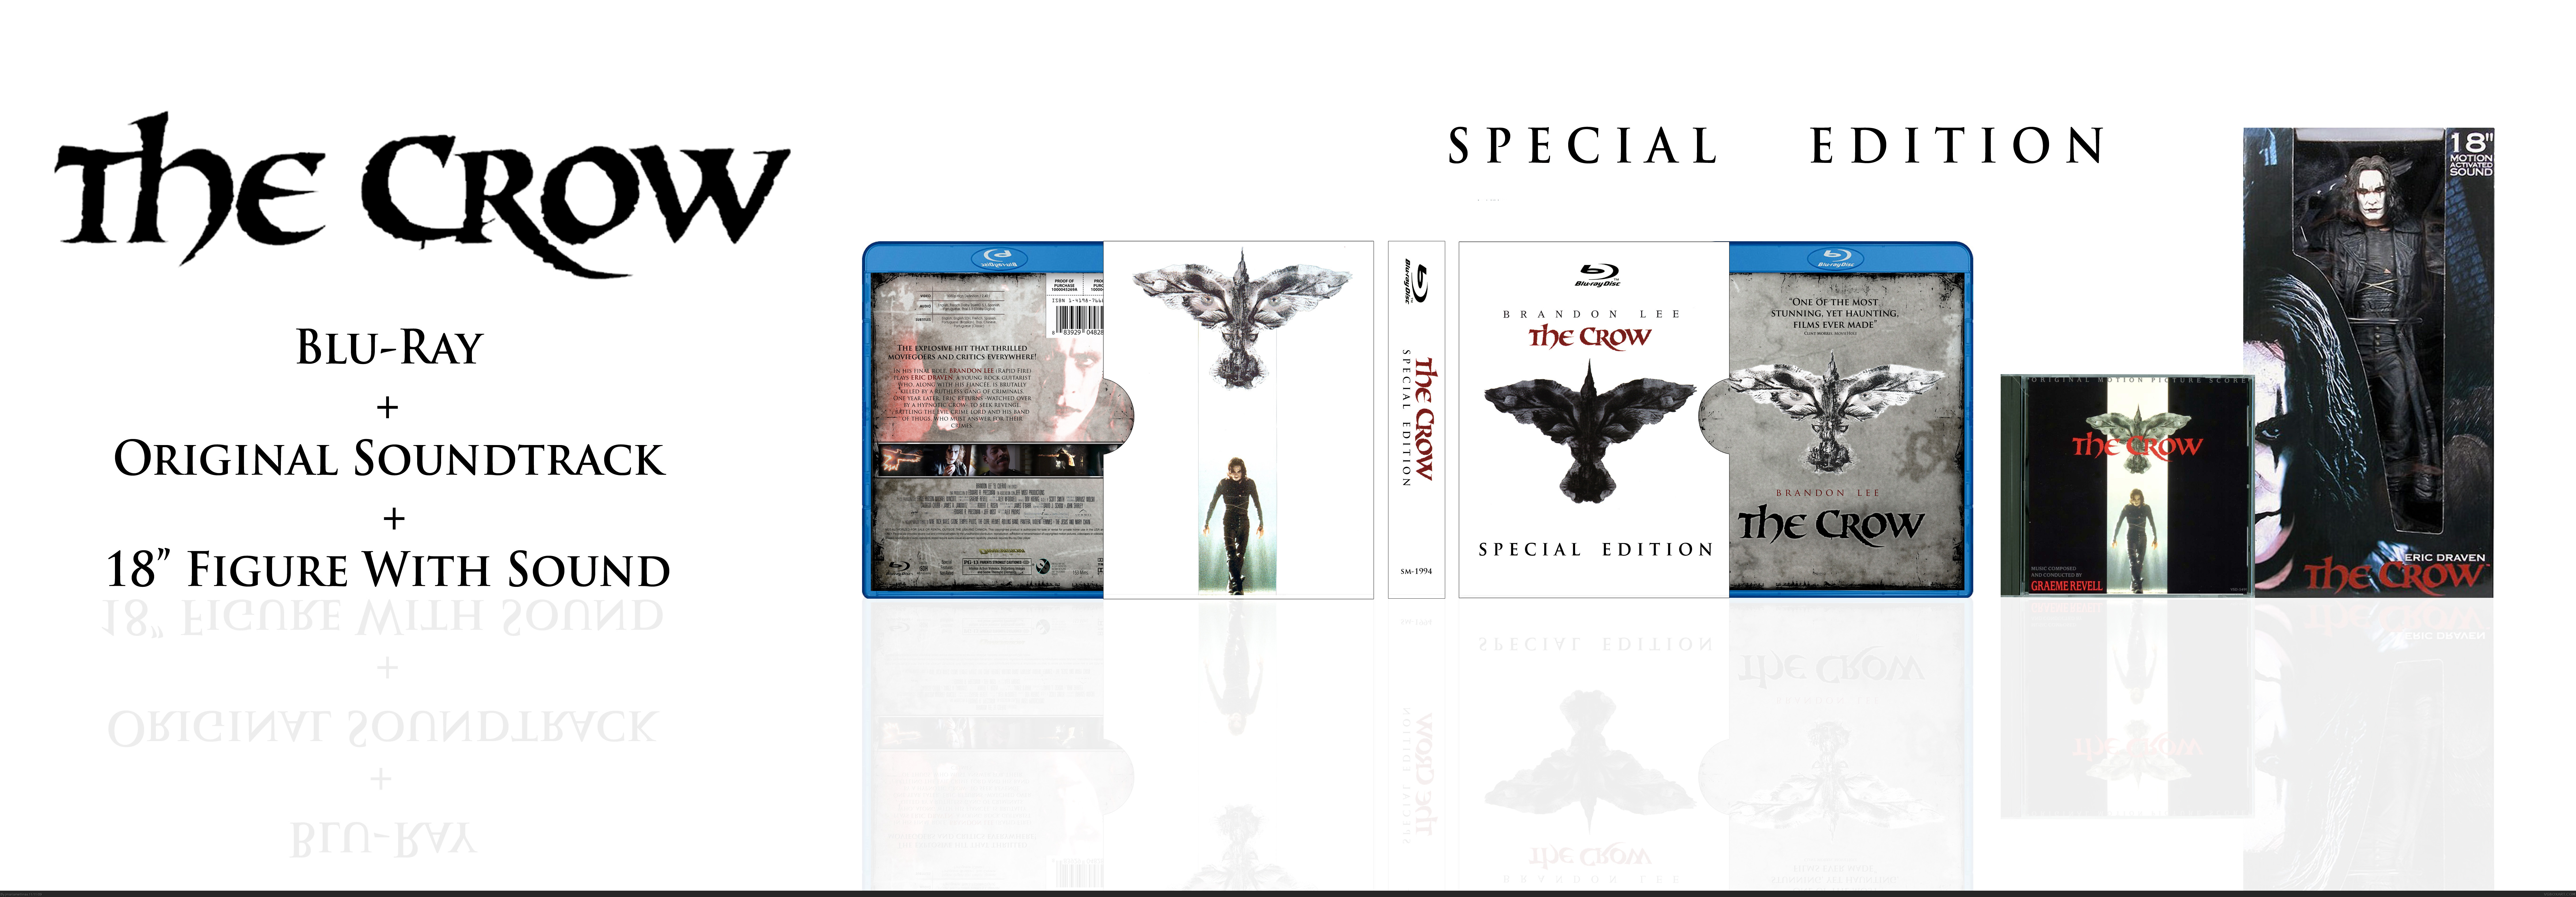 The Crow: Special Edition box cover